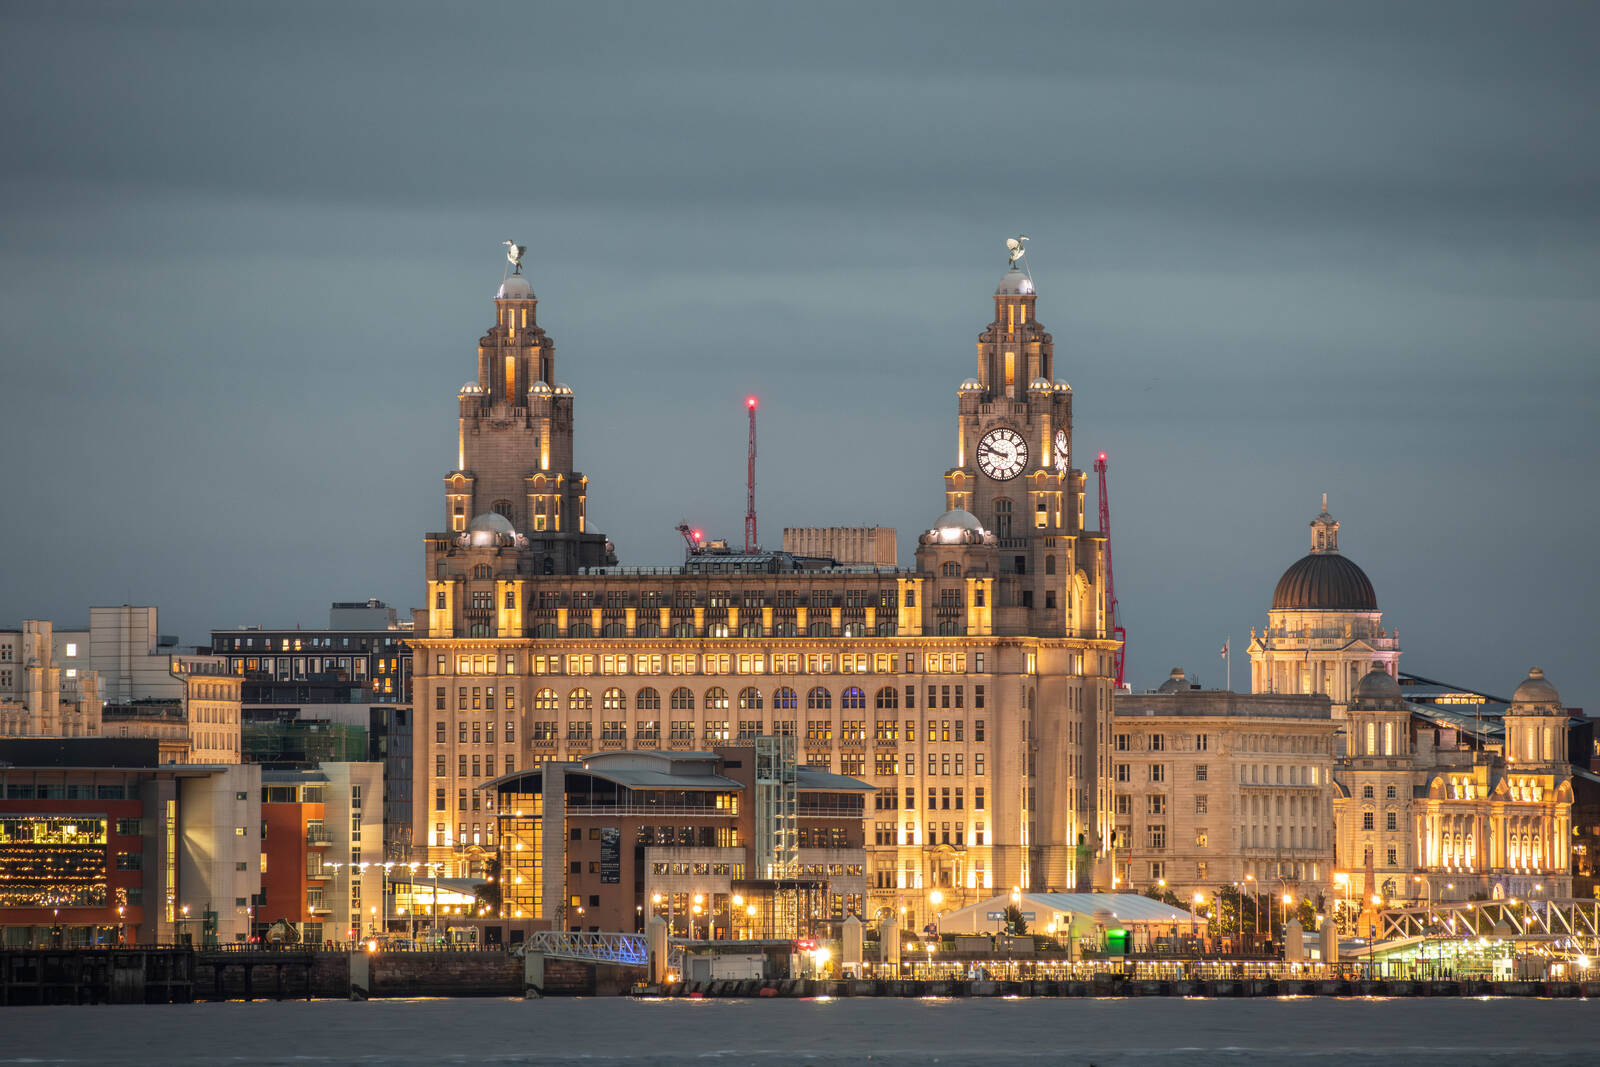 Image of View of The Three Graces, Liverpool Waterfront by michael bennett